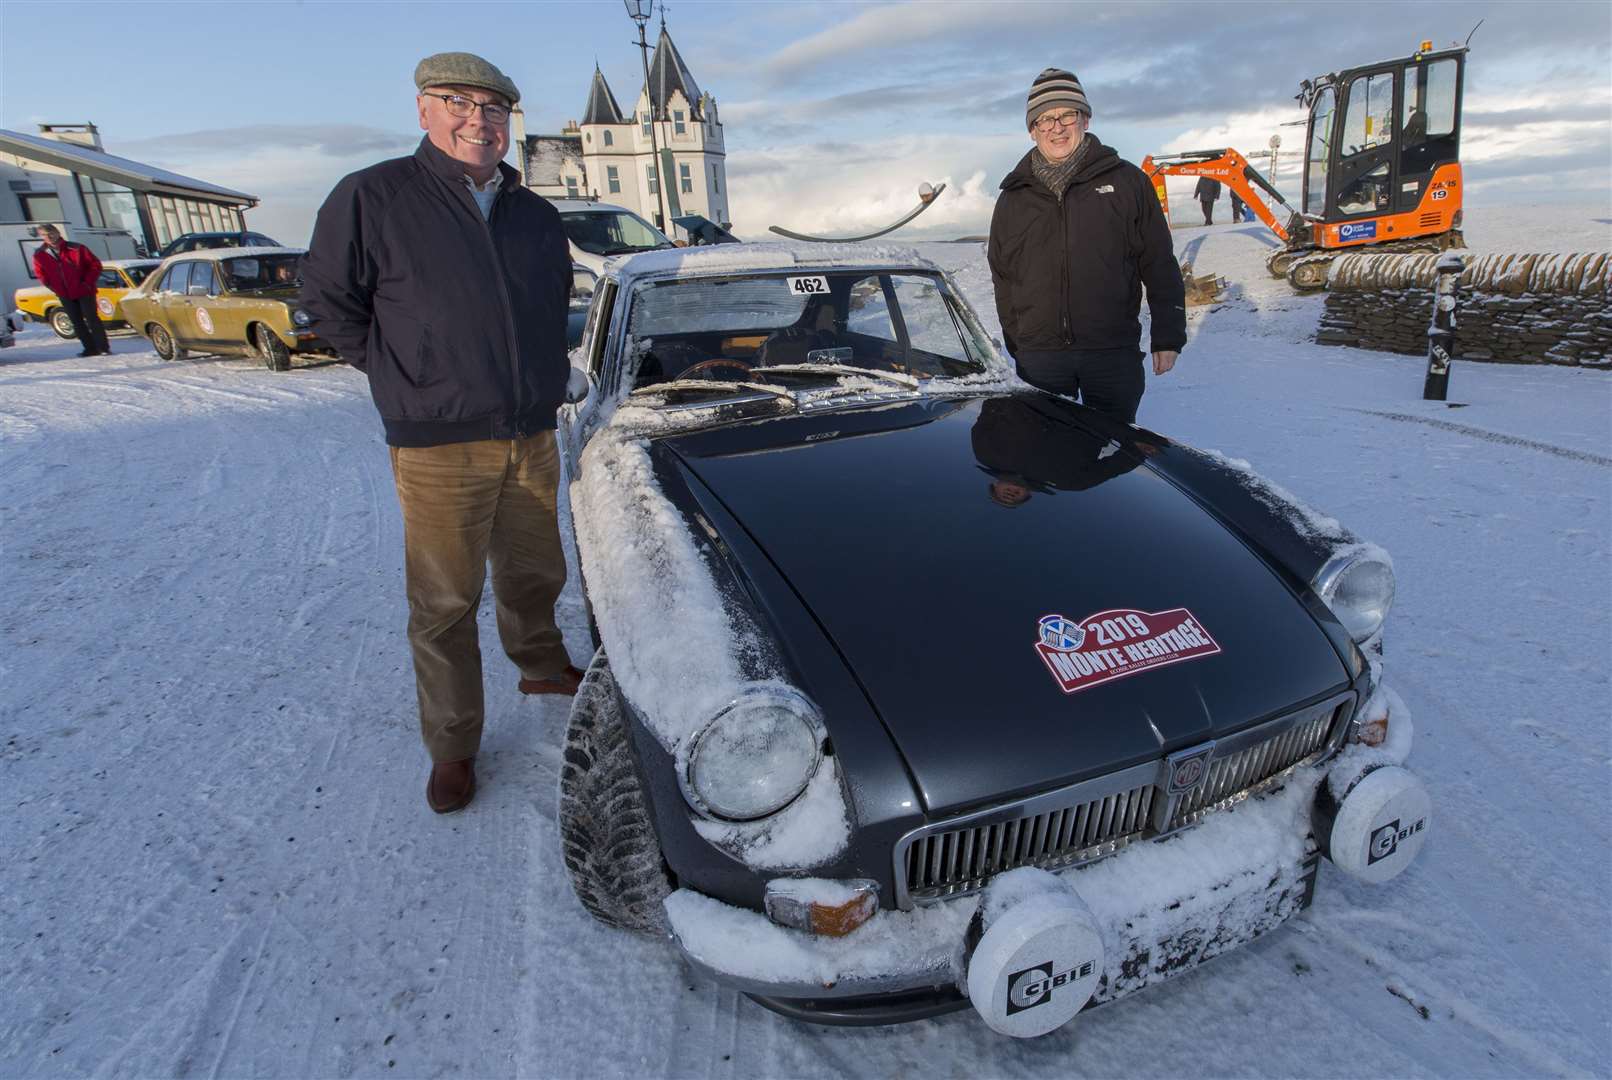 Flashback to January as Ian Close and Chris Macdonald, from Aberdeen, with their 1967 MGB GT, prepare to set off from snowy John O'Groats at the start of this year's event. Picture: Robert MacDonald / Northern Studios